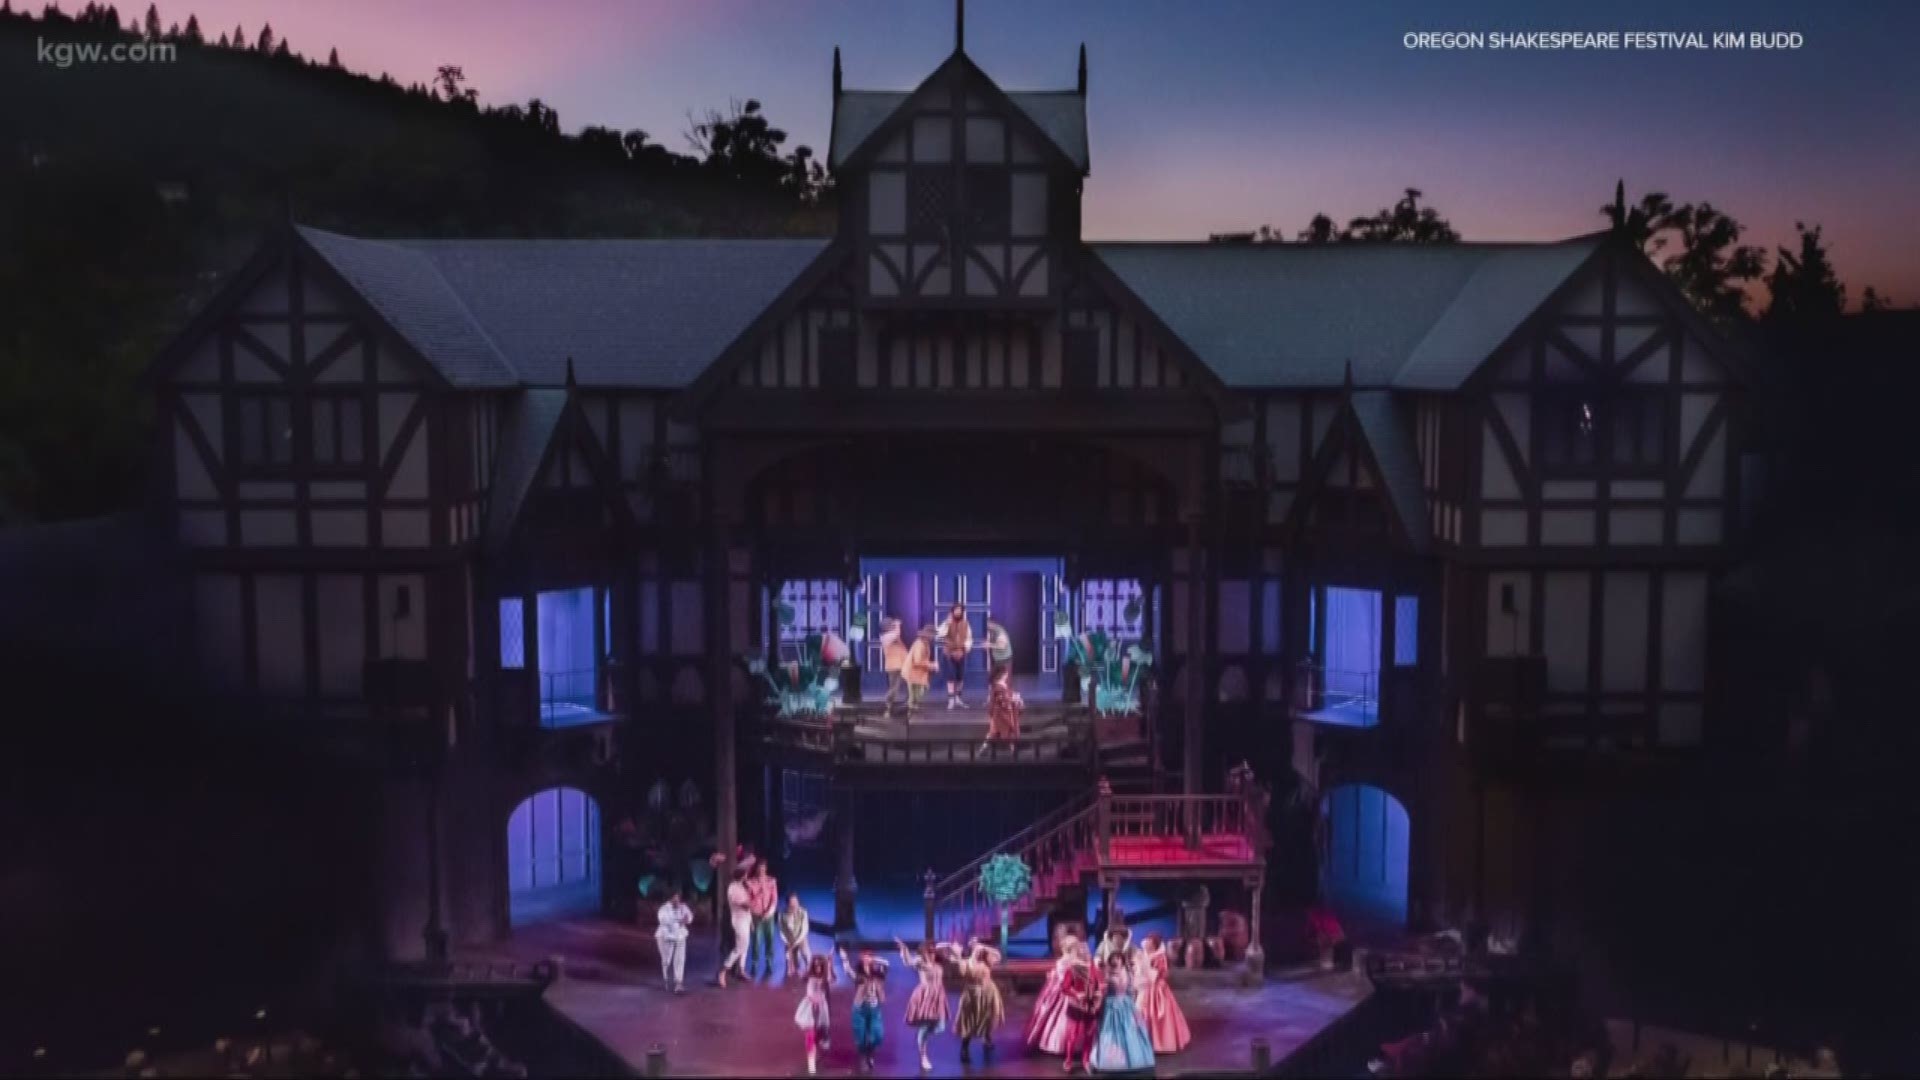 Here's some ways to help the Oregon Shakespeare Festival during the coronavirus outbreak.